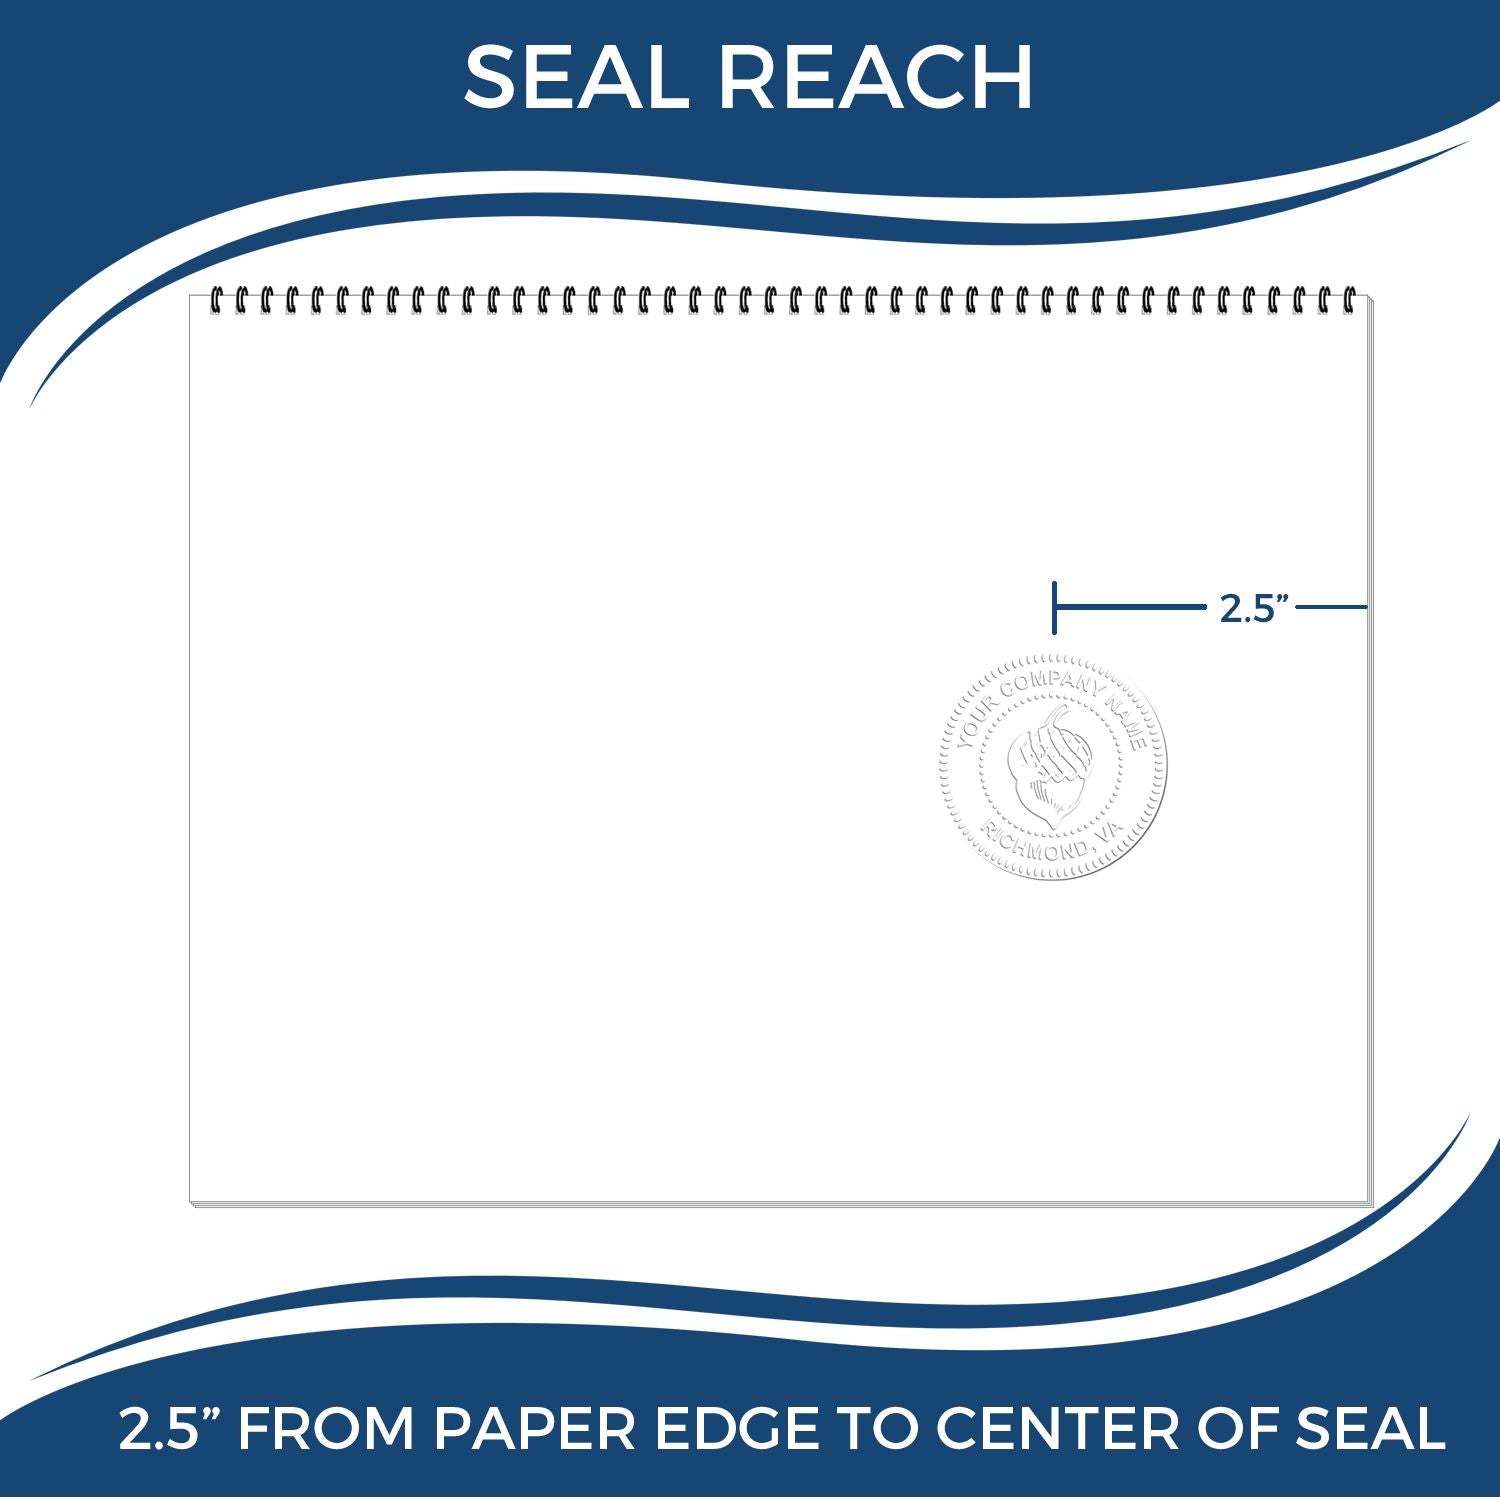 An infographic showing the seal reach which is represented by a ruler and a miniature seal image of the Long Reach Hawaii Geology Seal